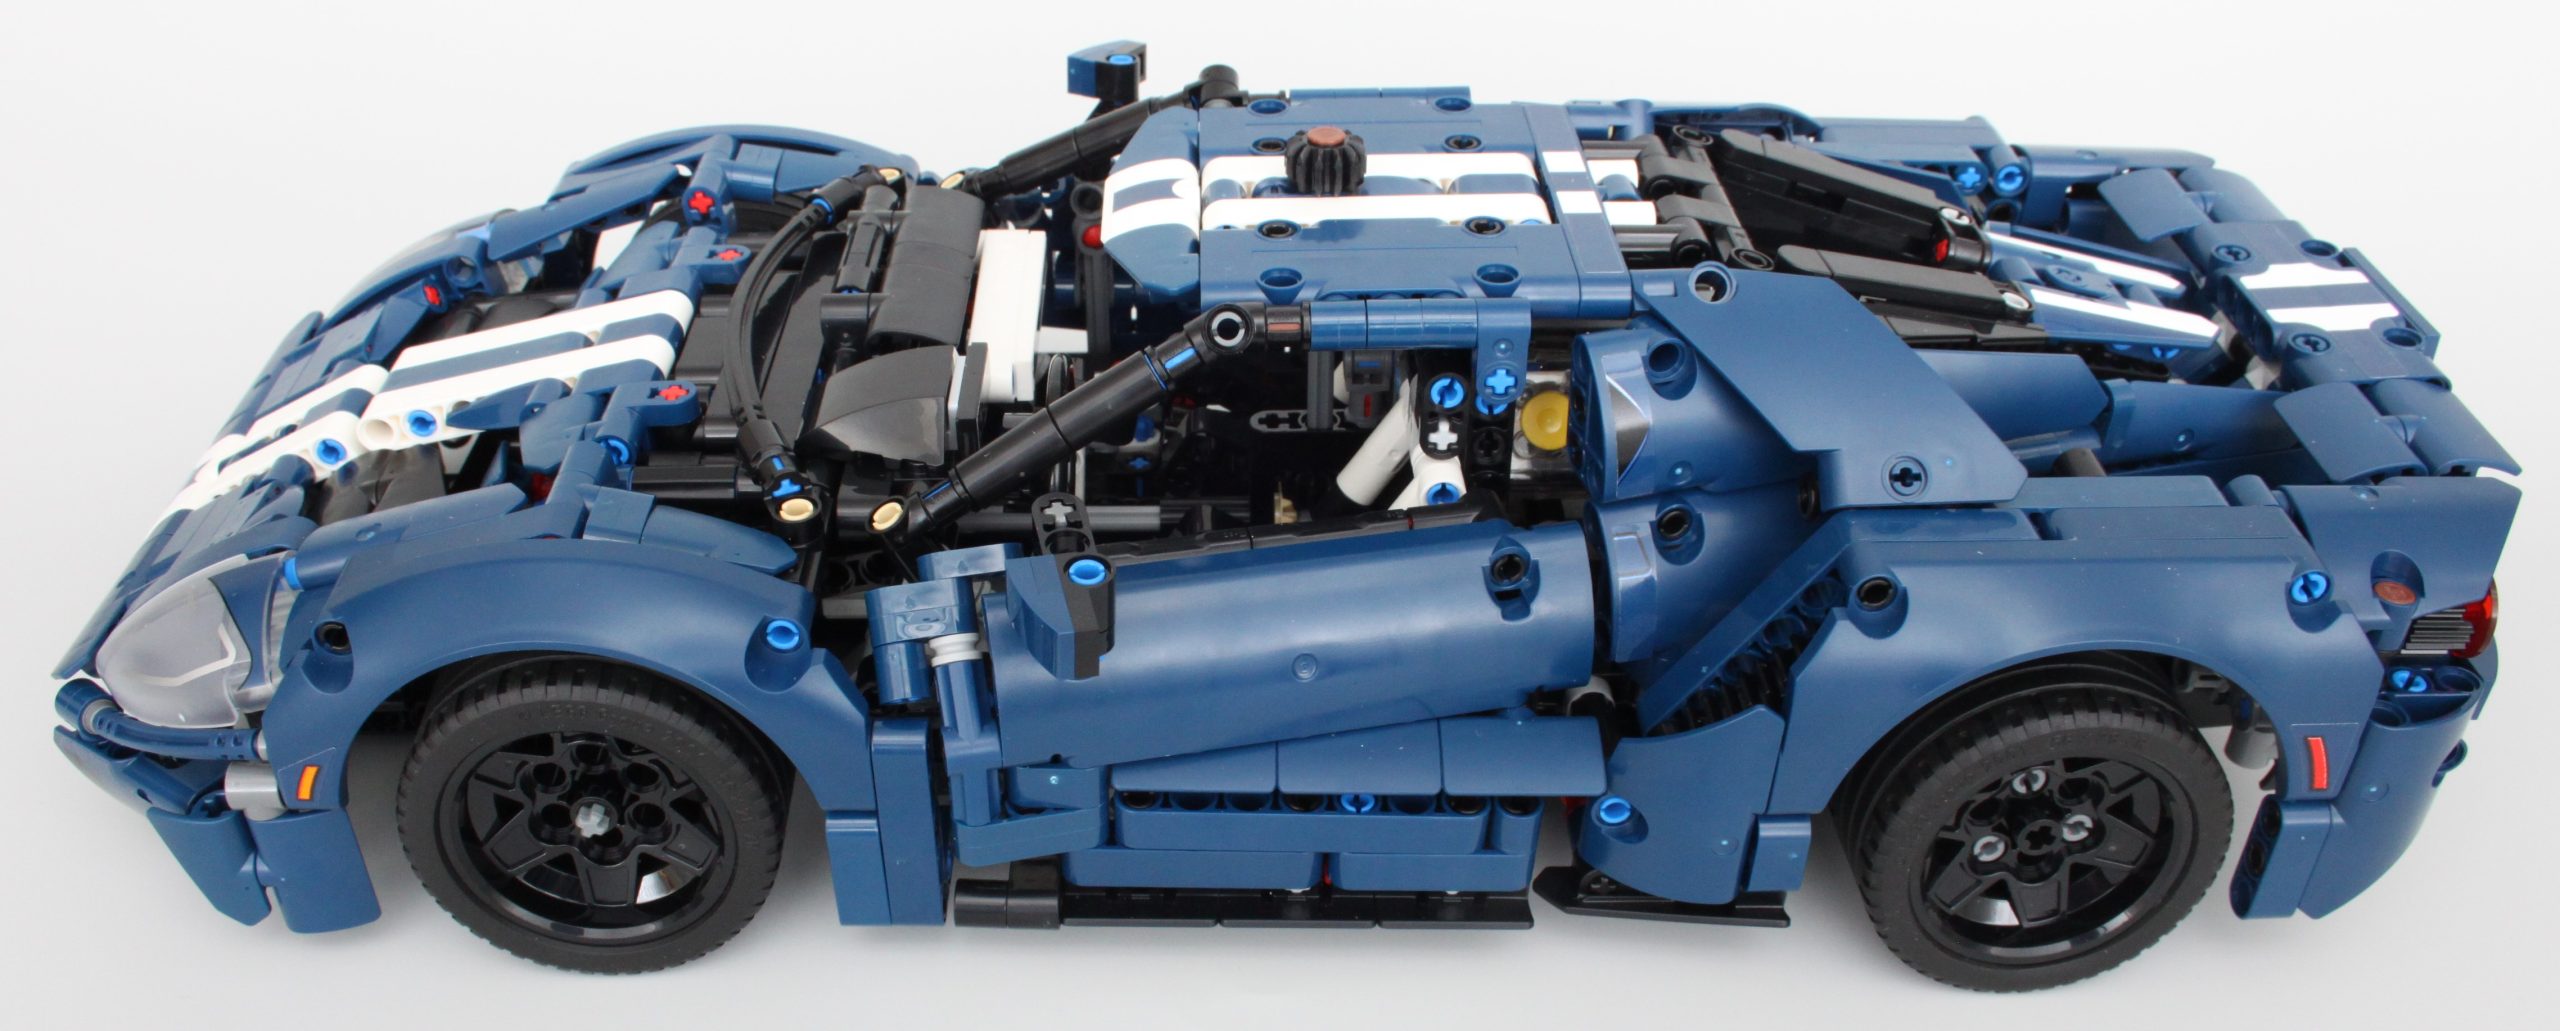 LEGO Technic Ford GT Speed Build #42154 